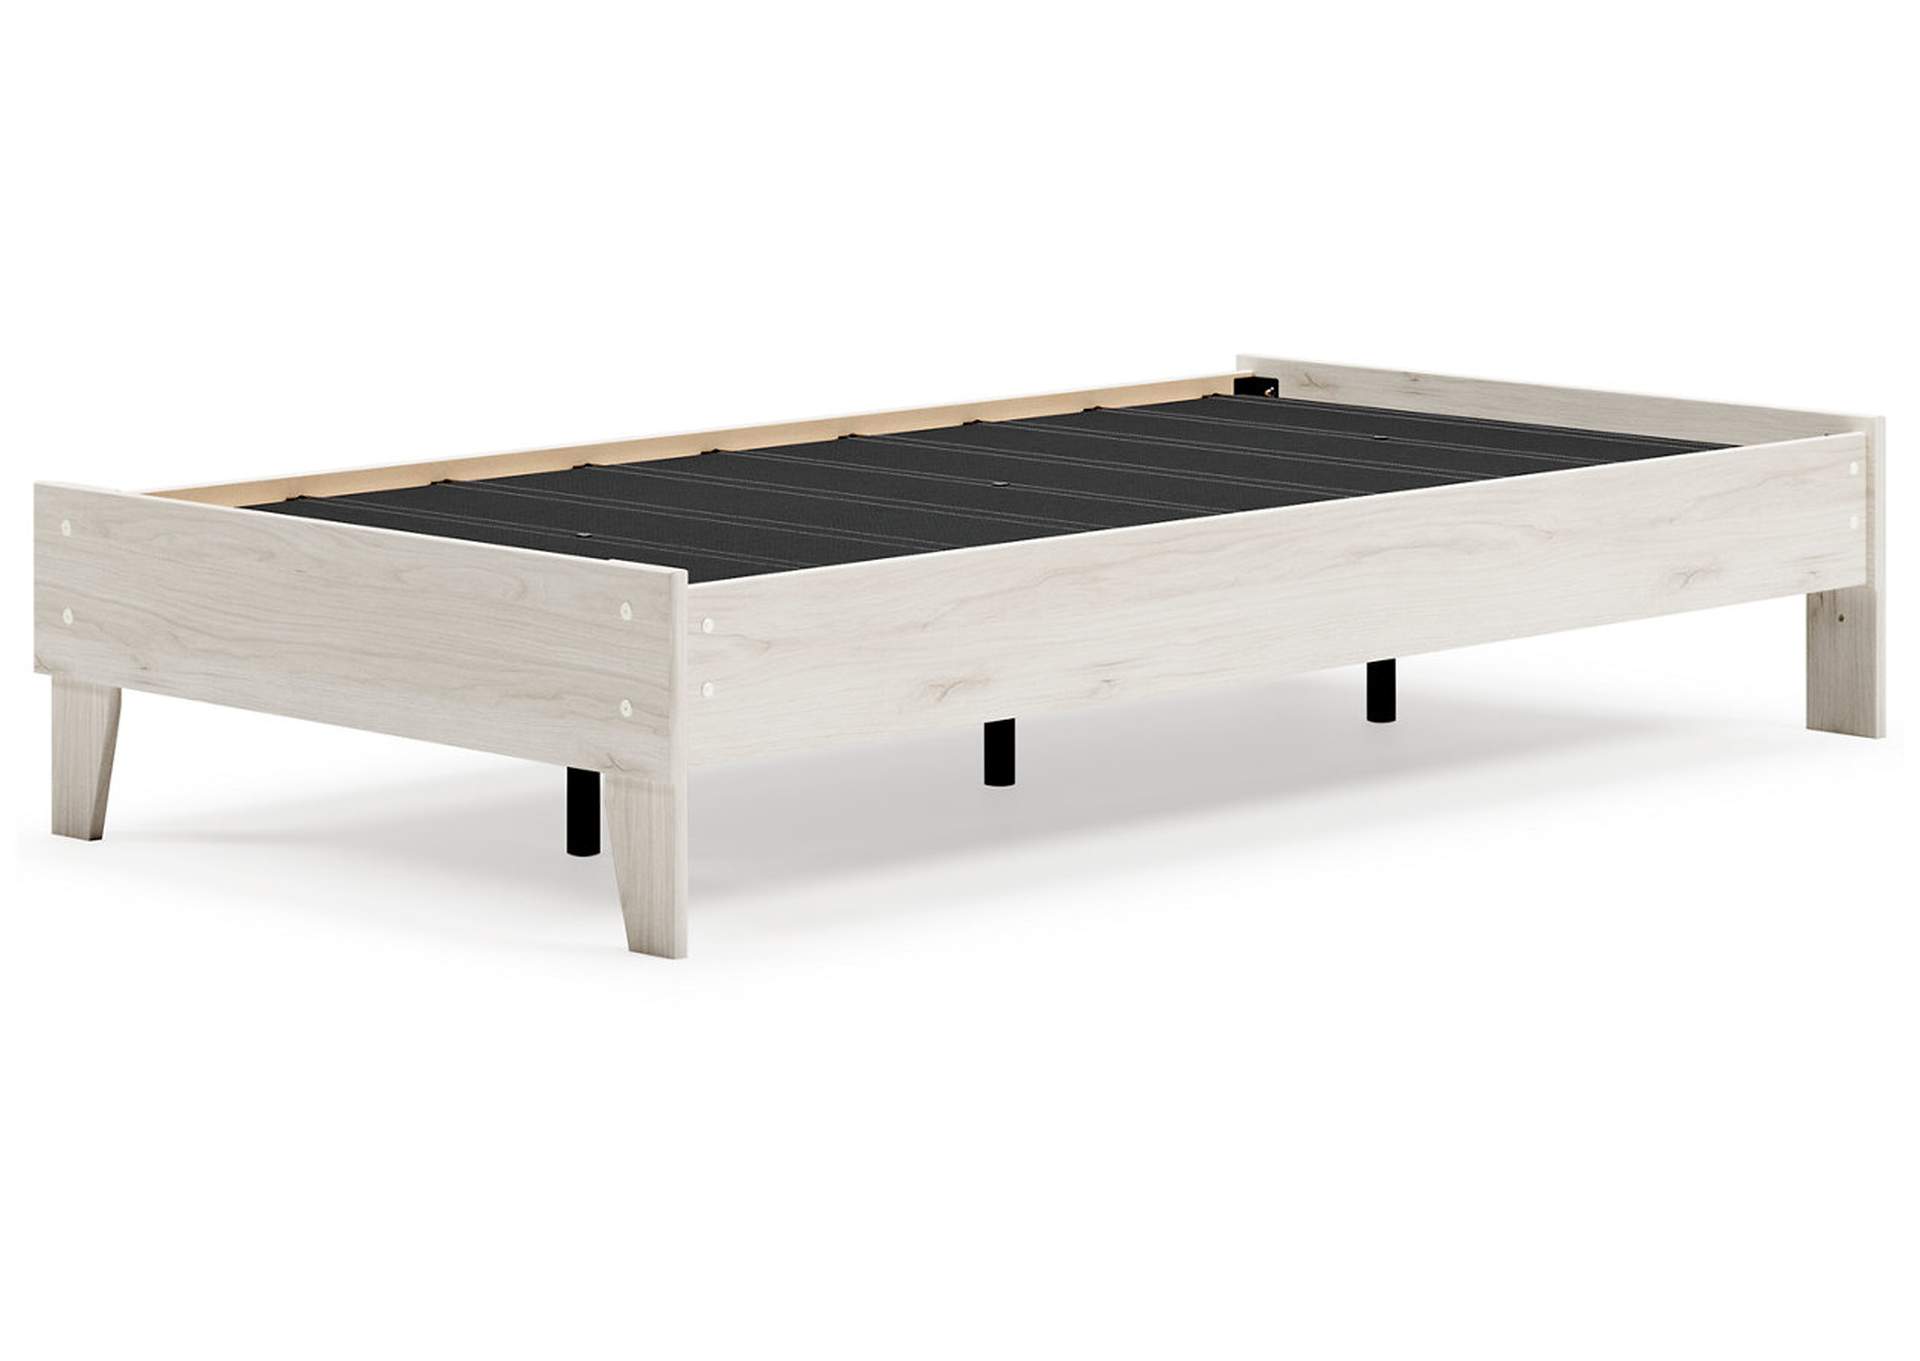 Socalle Twin Platform Bed,Direct To Consumer Express